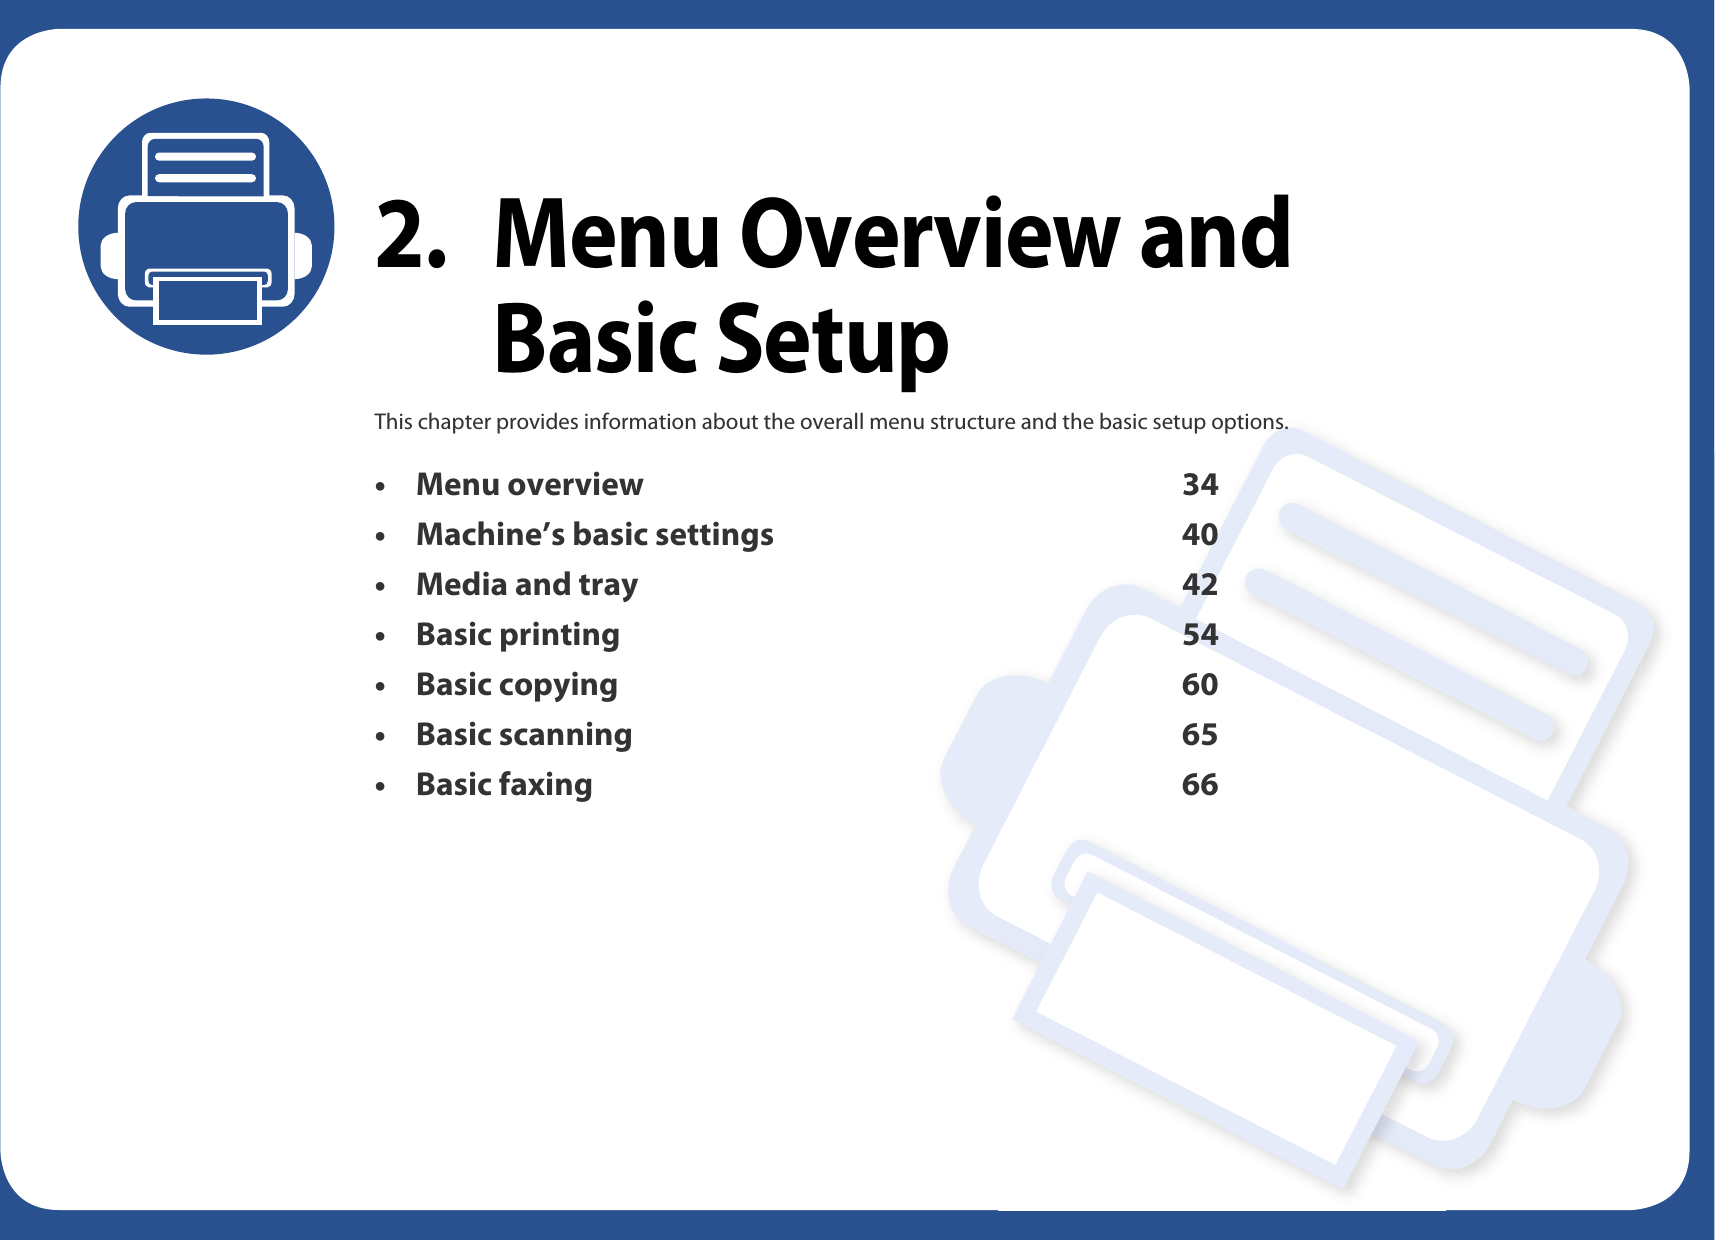 2. Menu Overview and Basic SetupThis chapter provides information about the overall menu structure and the basic setup options.• Menu overview 34• Machine’s basic settings 40• Media and tray 42• Basic printing 54• Basic copying 60• Basic scanning 65• Basic faxing 66